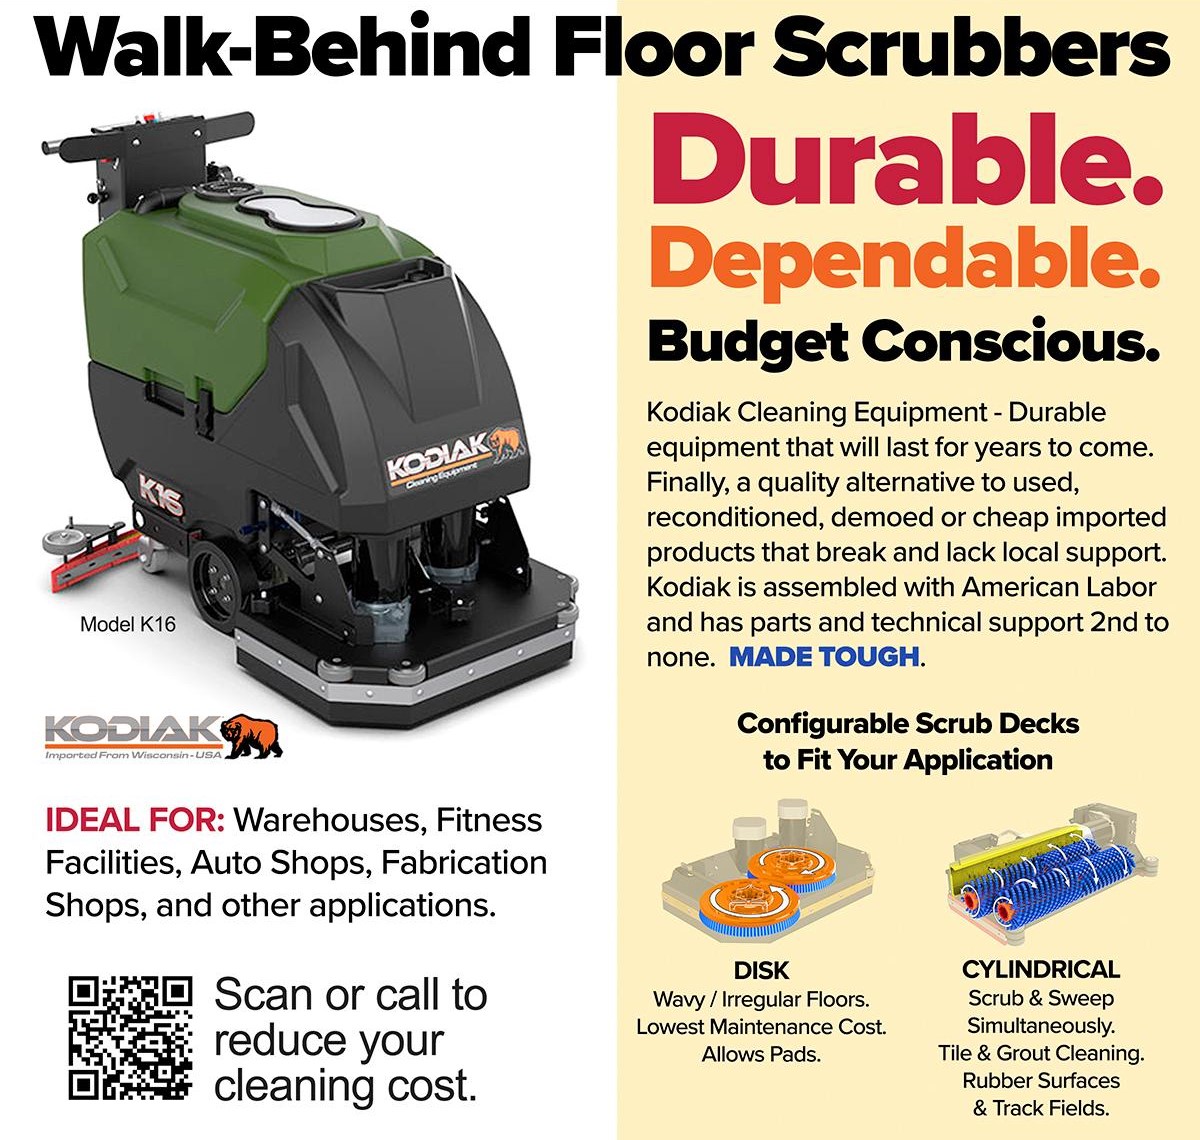 Kodiak Walk Behind Scrubbers - Ideal for Warehouses, Fitness Facilities, Auto Shops, Fabrication Shops. Available in Disk and Cylindrical